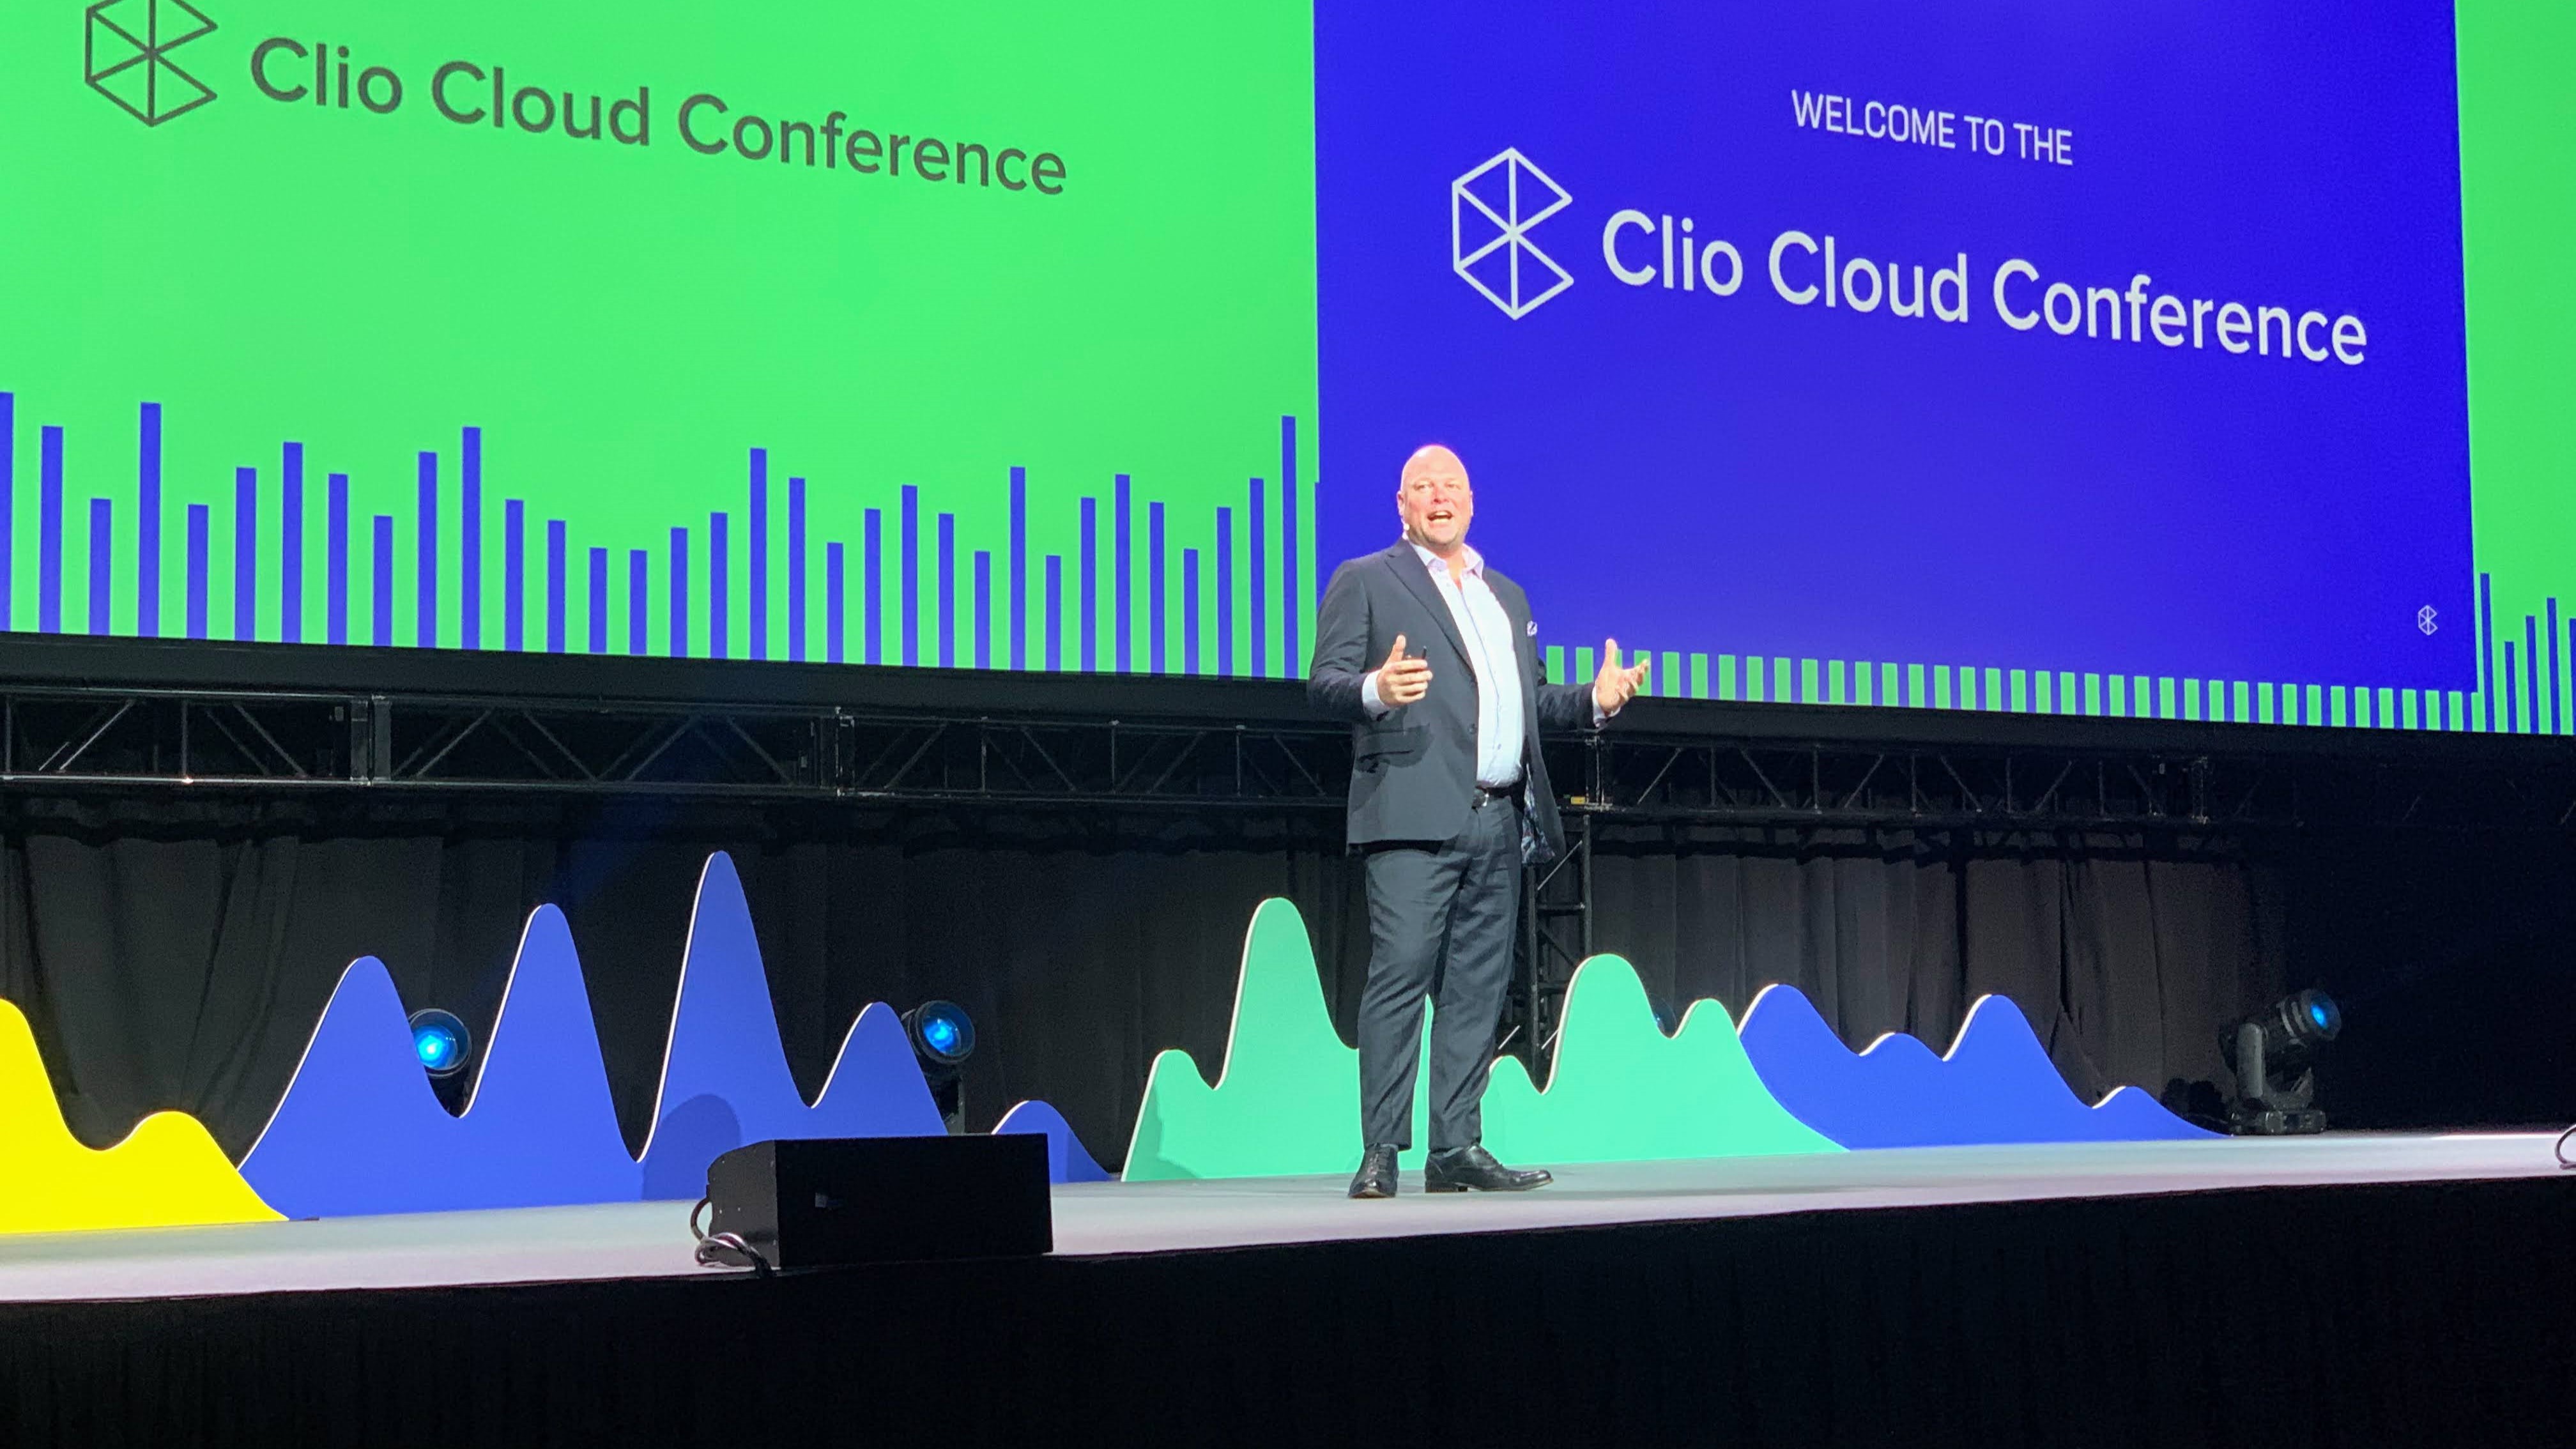 The Gaylord Opryland Isn’t So Bad After All &#8230; and Other Takeaways from the Clio Cloud Conference